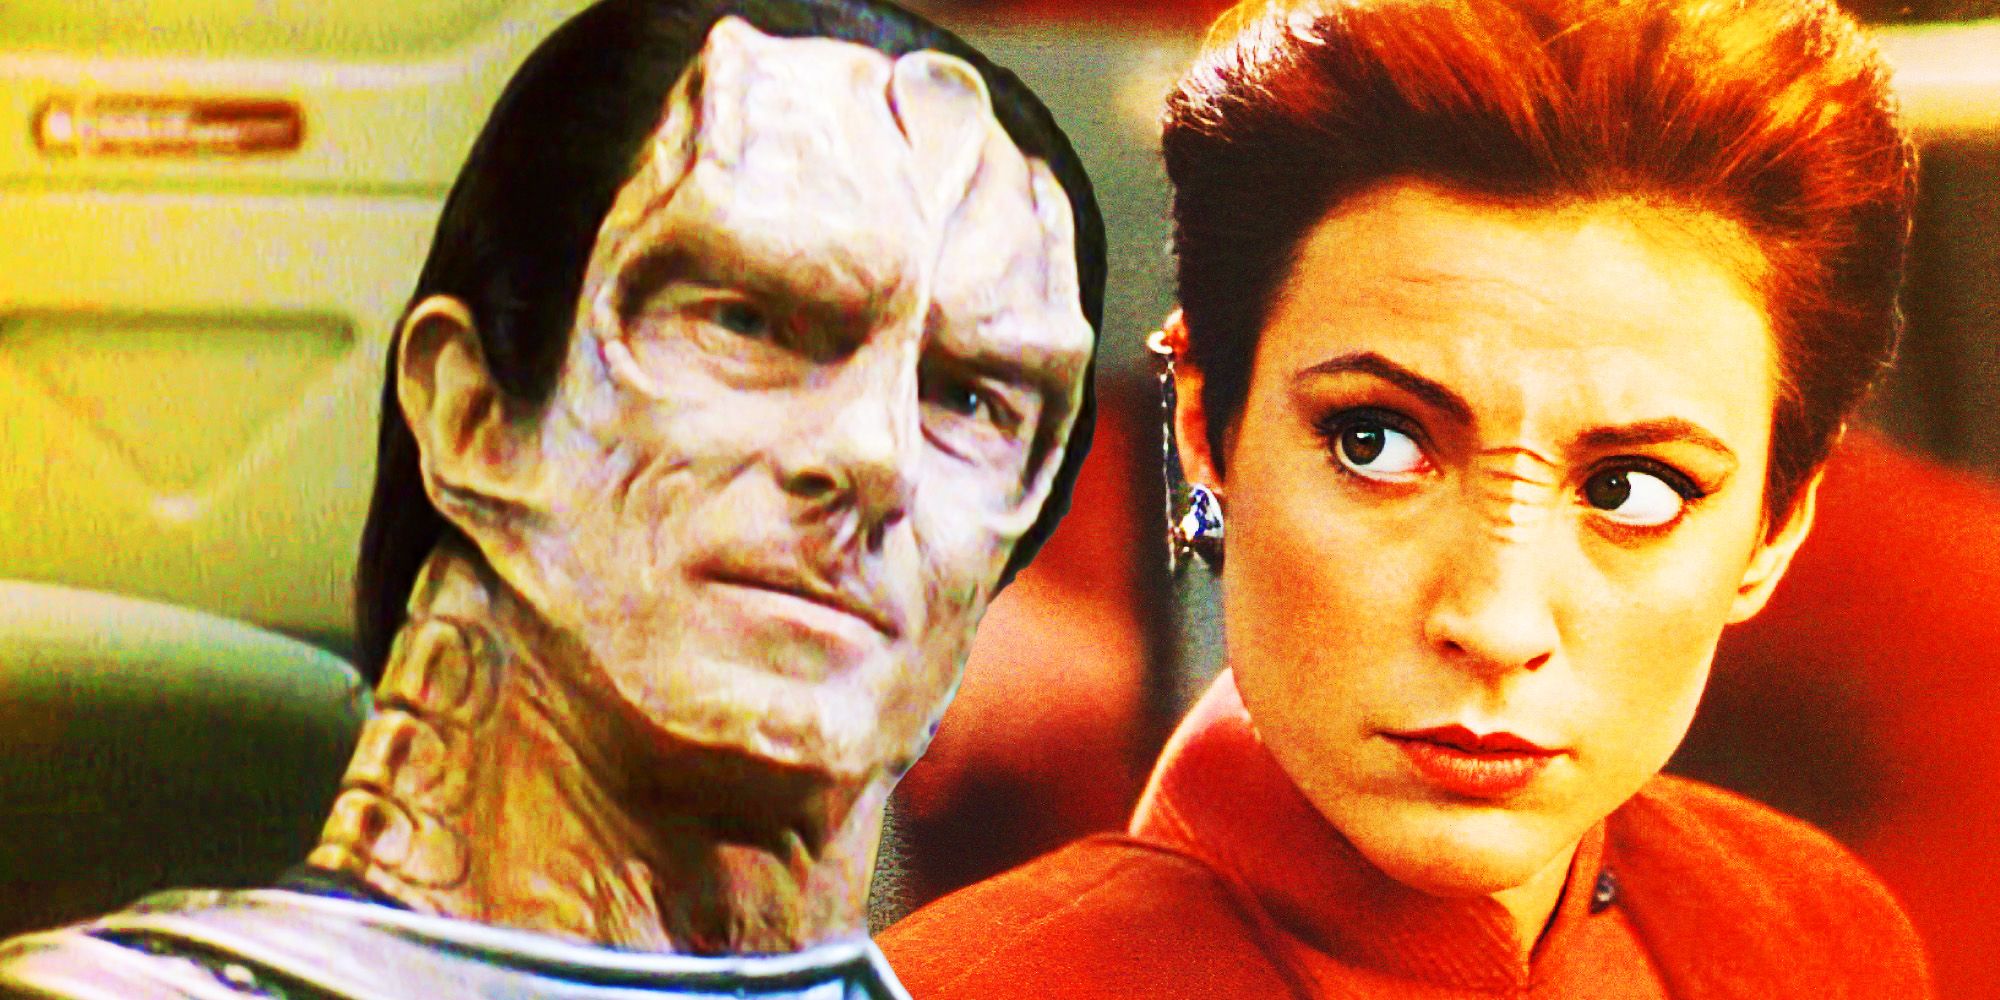 DS9 Season 1 Secretly Revealed Kira Knew Odo Was In Love With Her